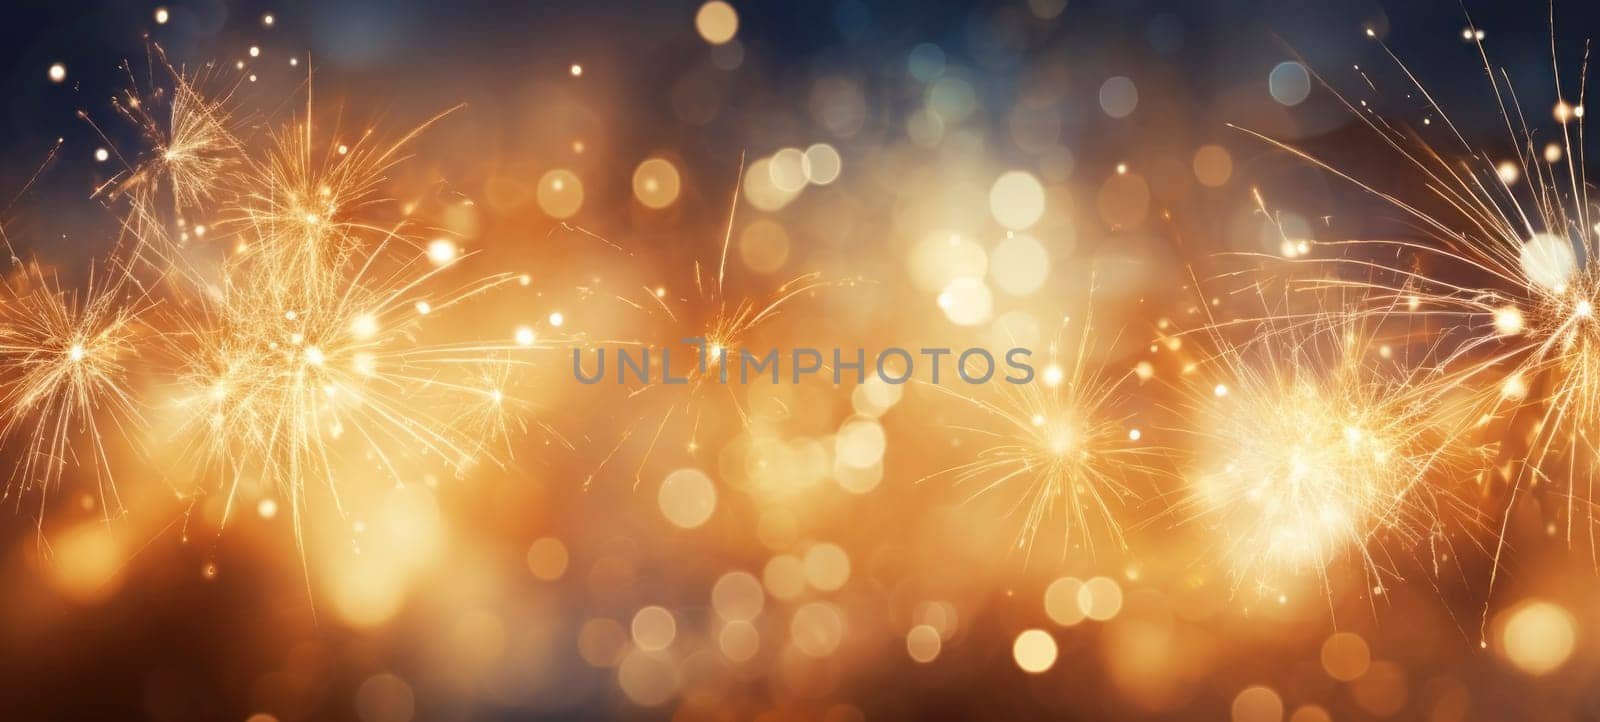 Abstract background with golden fireworks, sparkles, shiny bokeh glitter lights. Festive gold background for card, flyer, invitation, placard, voucher, banner